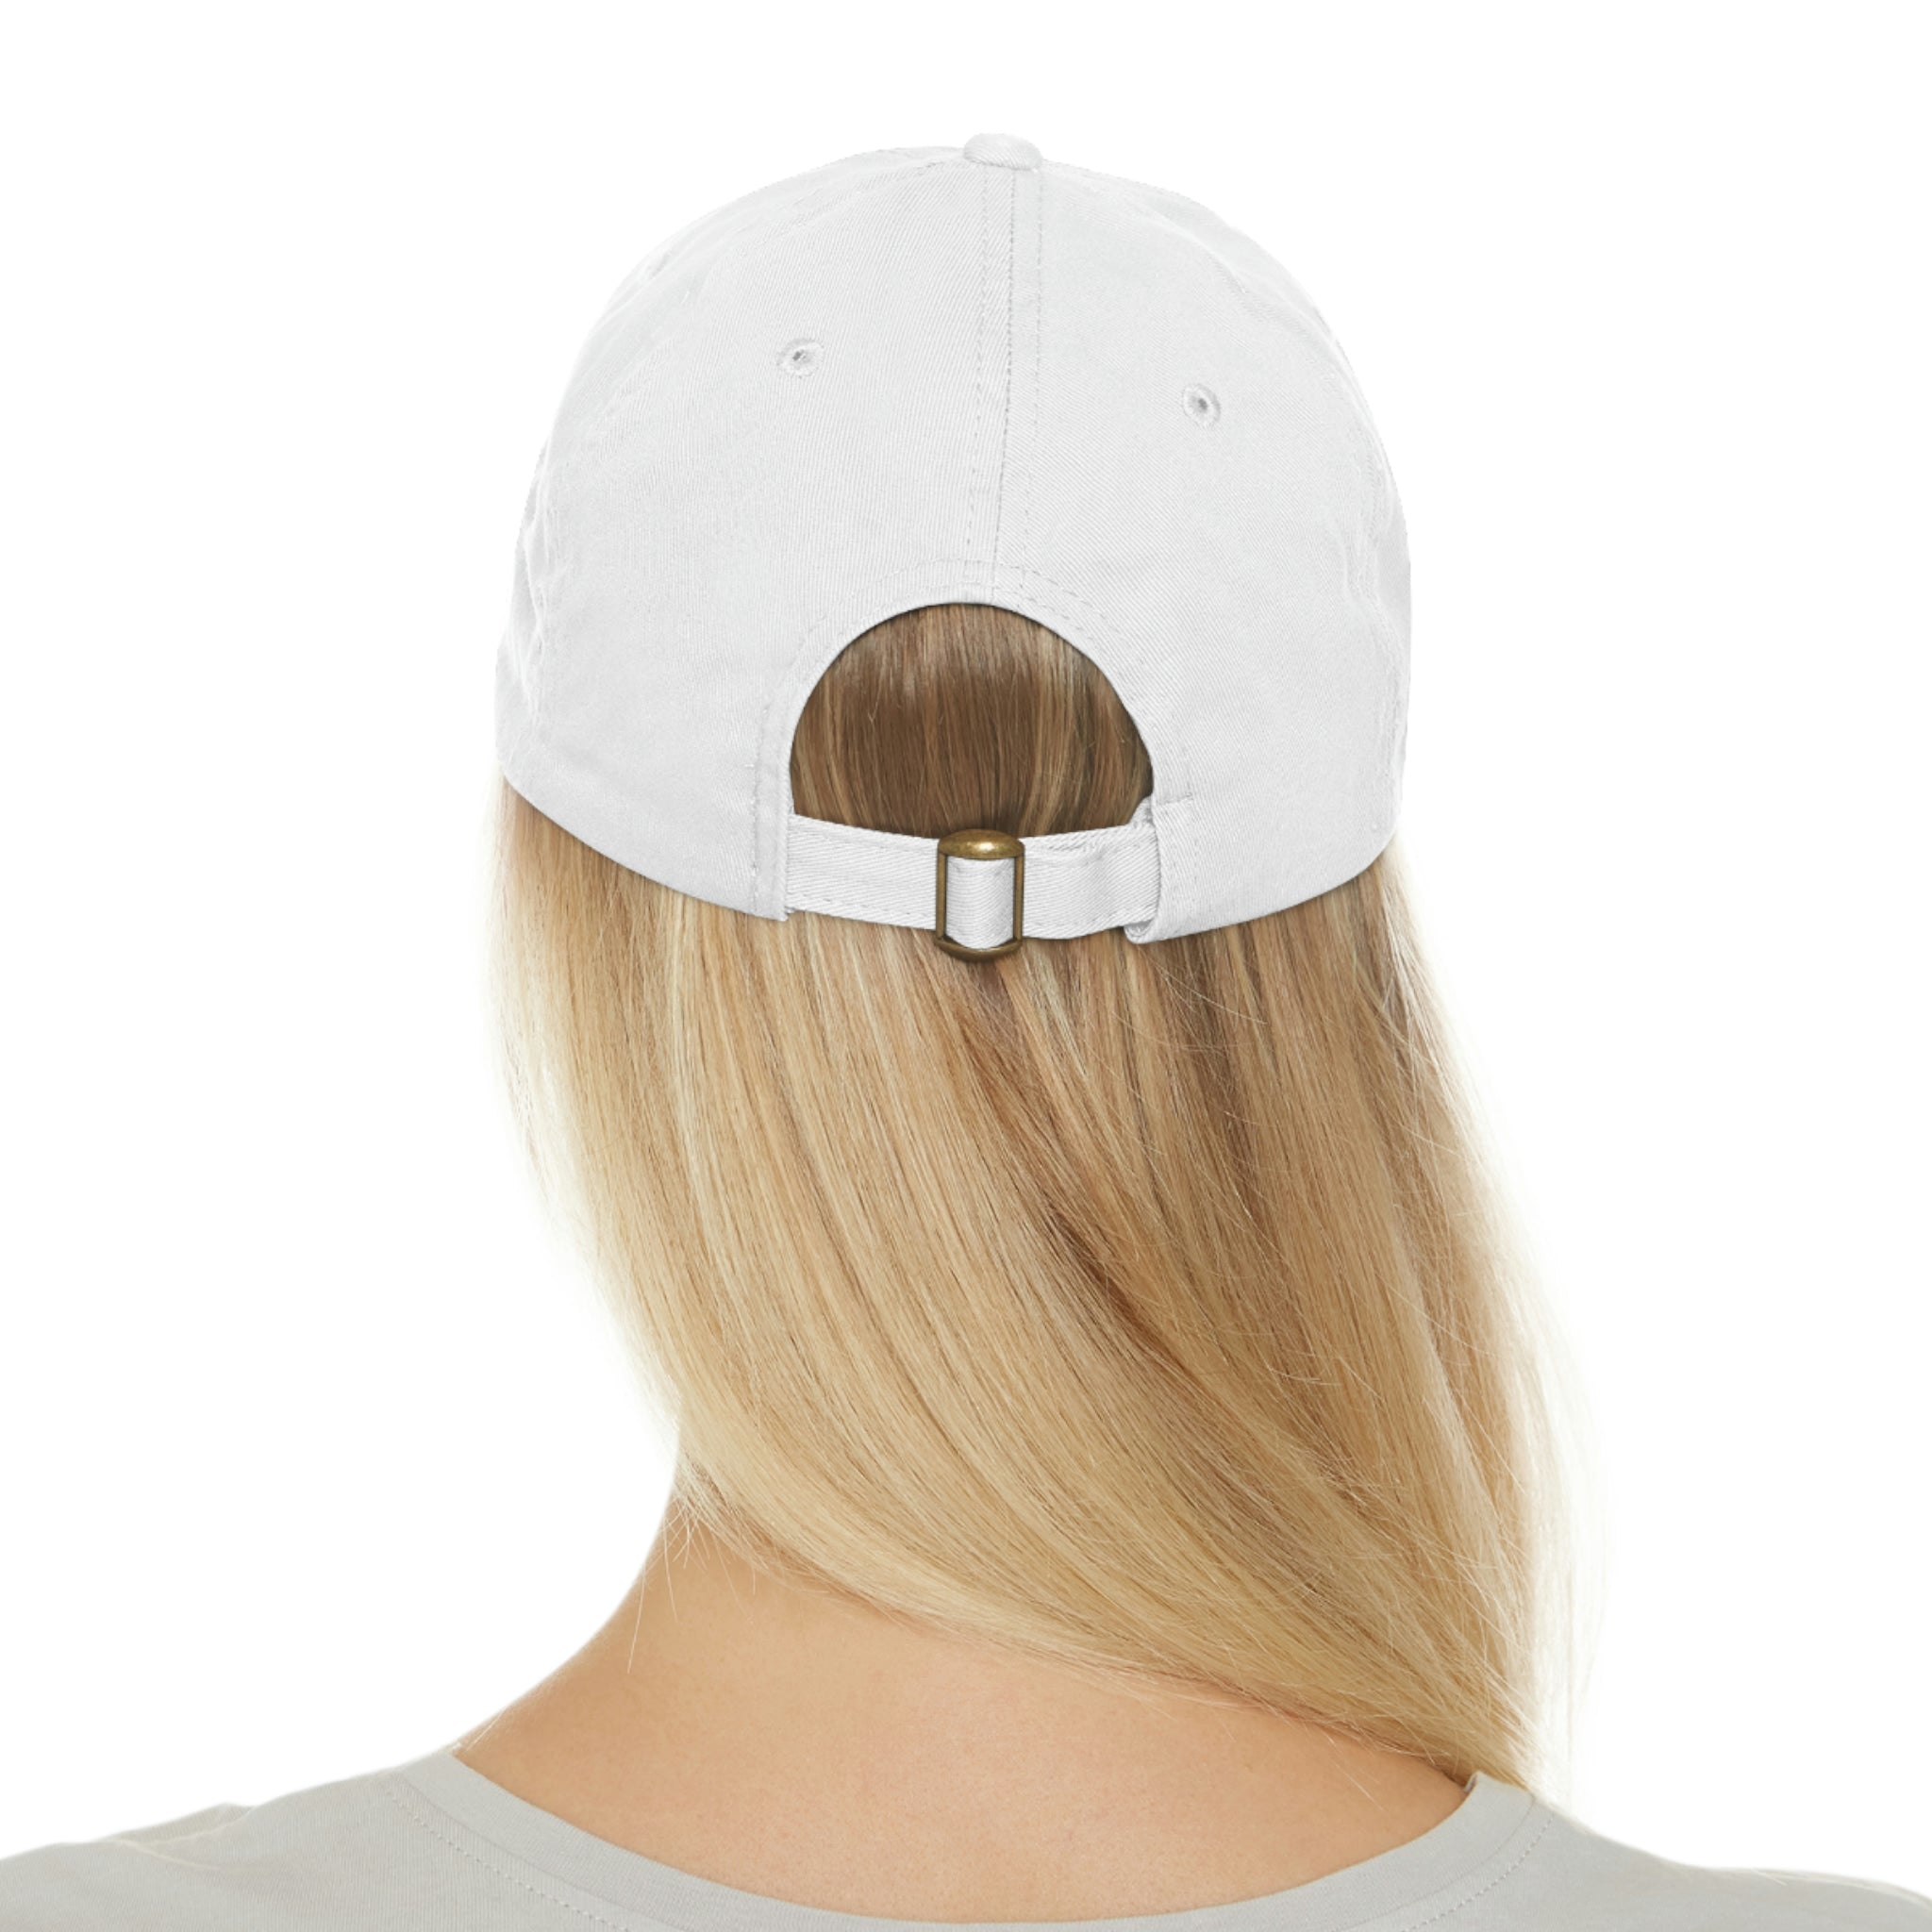 Cultiva Greatness Hat with Leather Patch